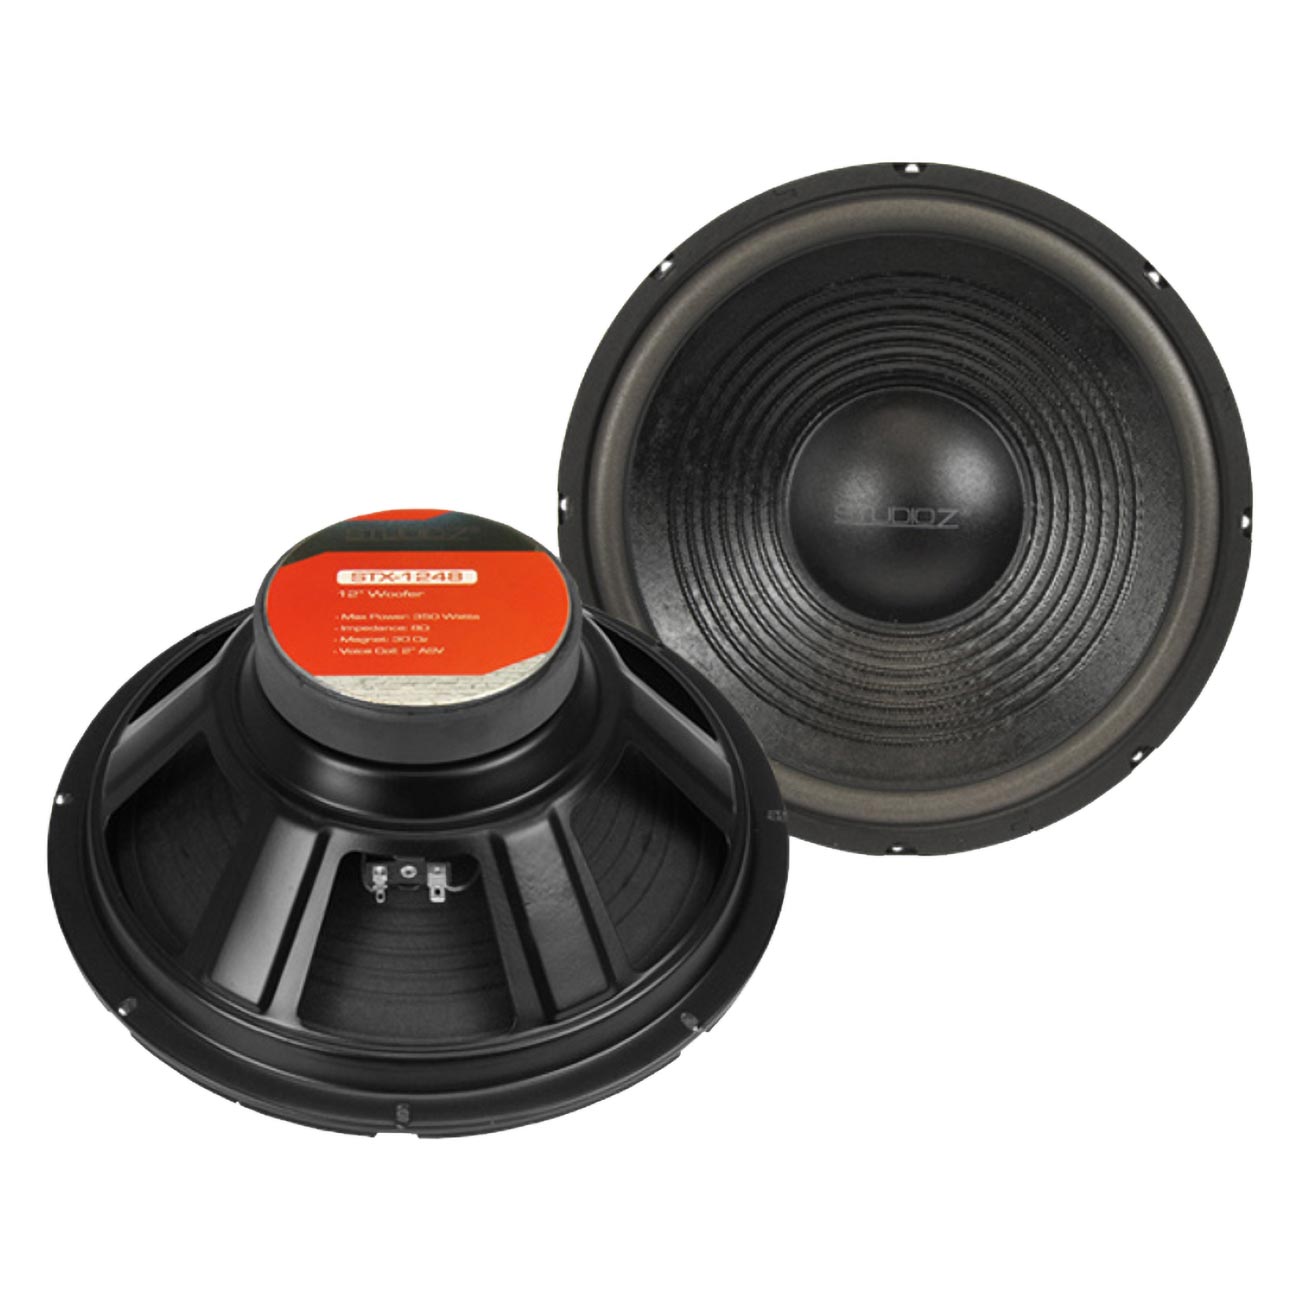 Studio Z 12" Replacement Woofer 350 Watts Max 8 ohm SVC